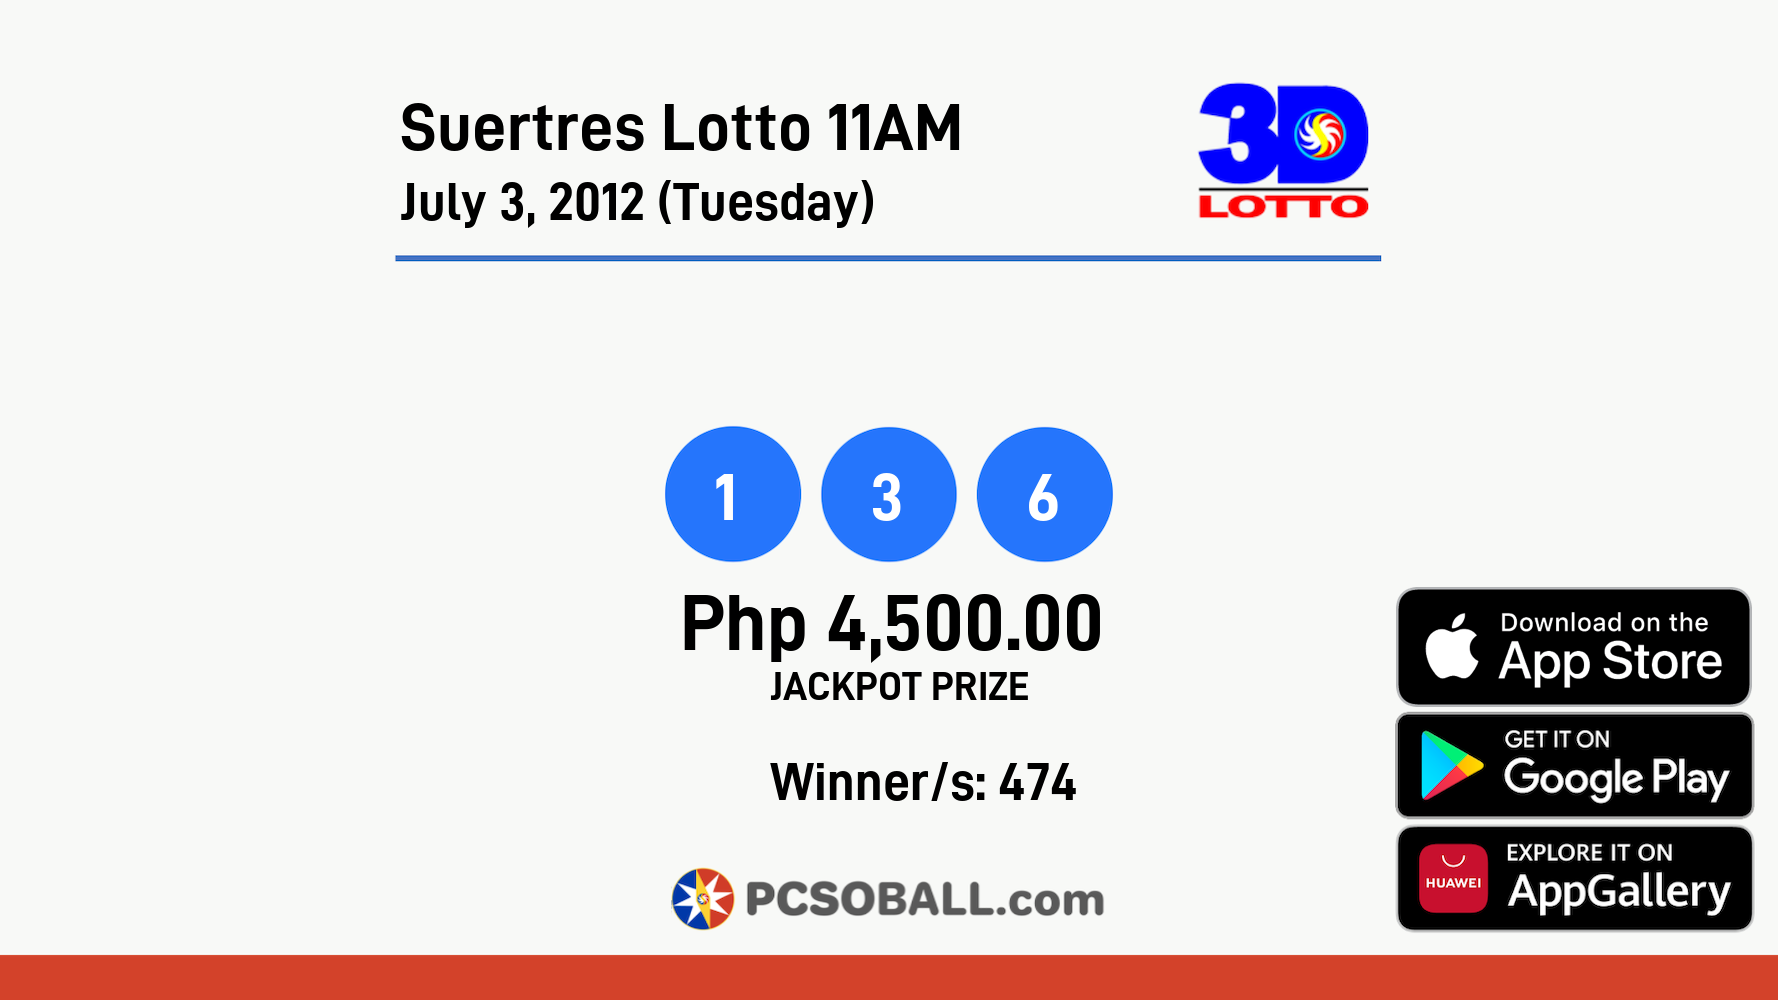 Suertres Lotto 11AM July 3, 2012 (Tuesday) Result